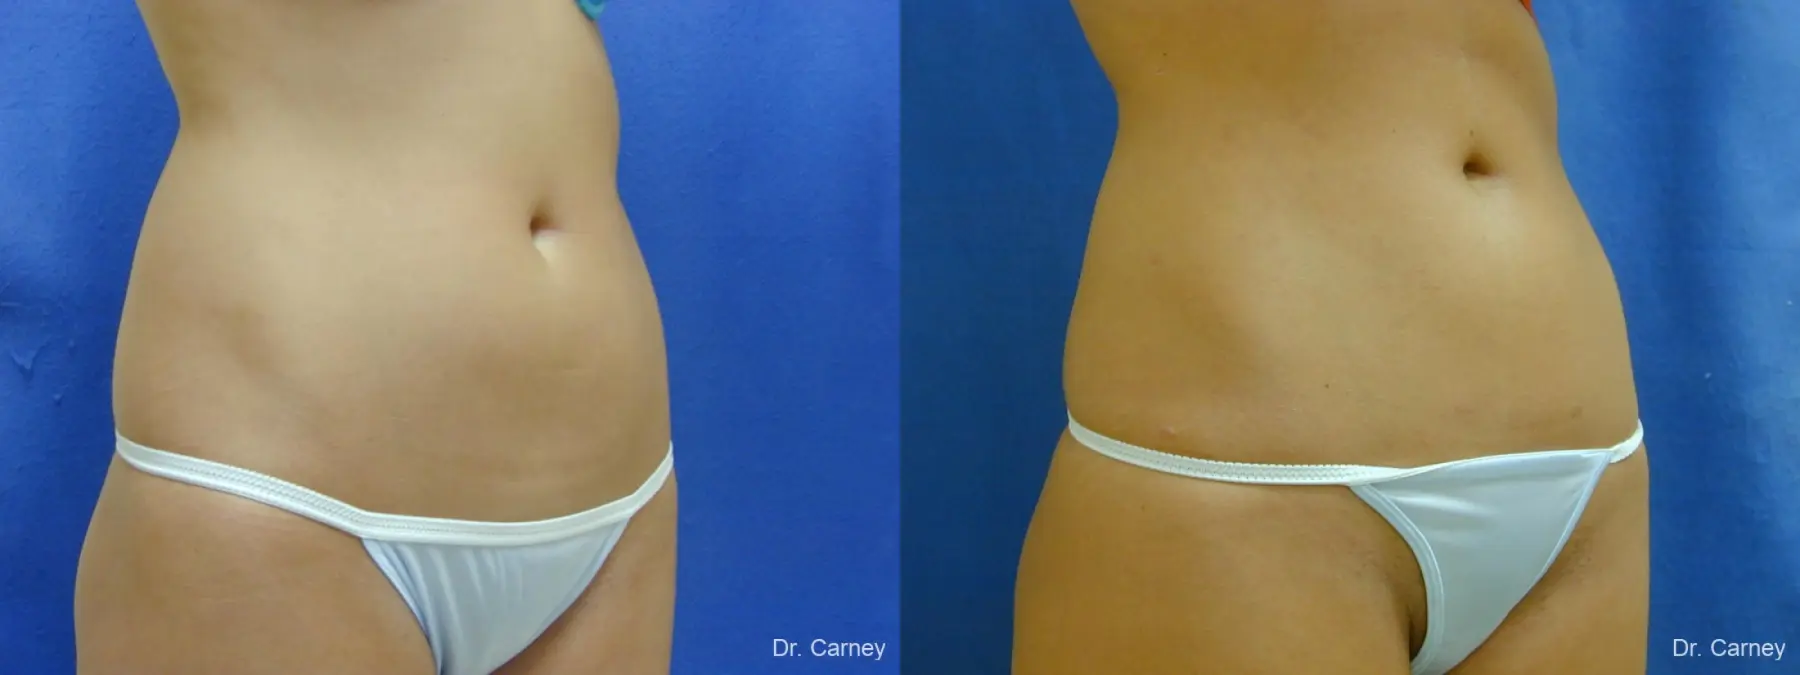 Virginia Beach Liposuction 1277 - Before and After 2